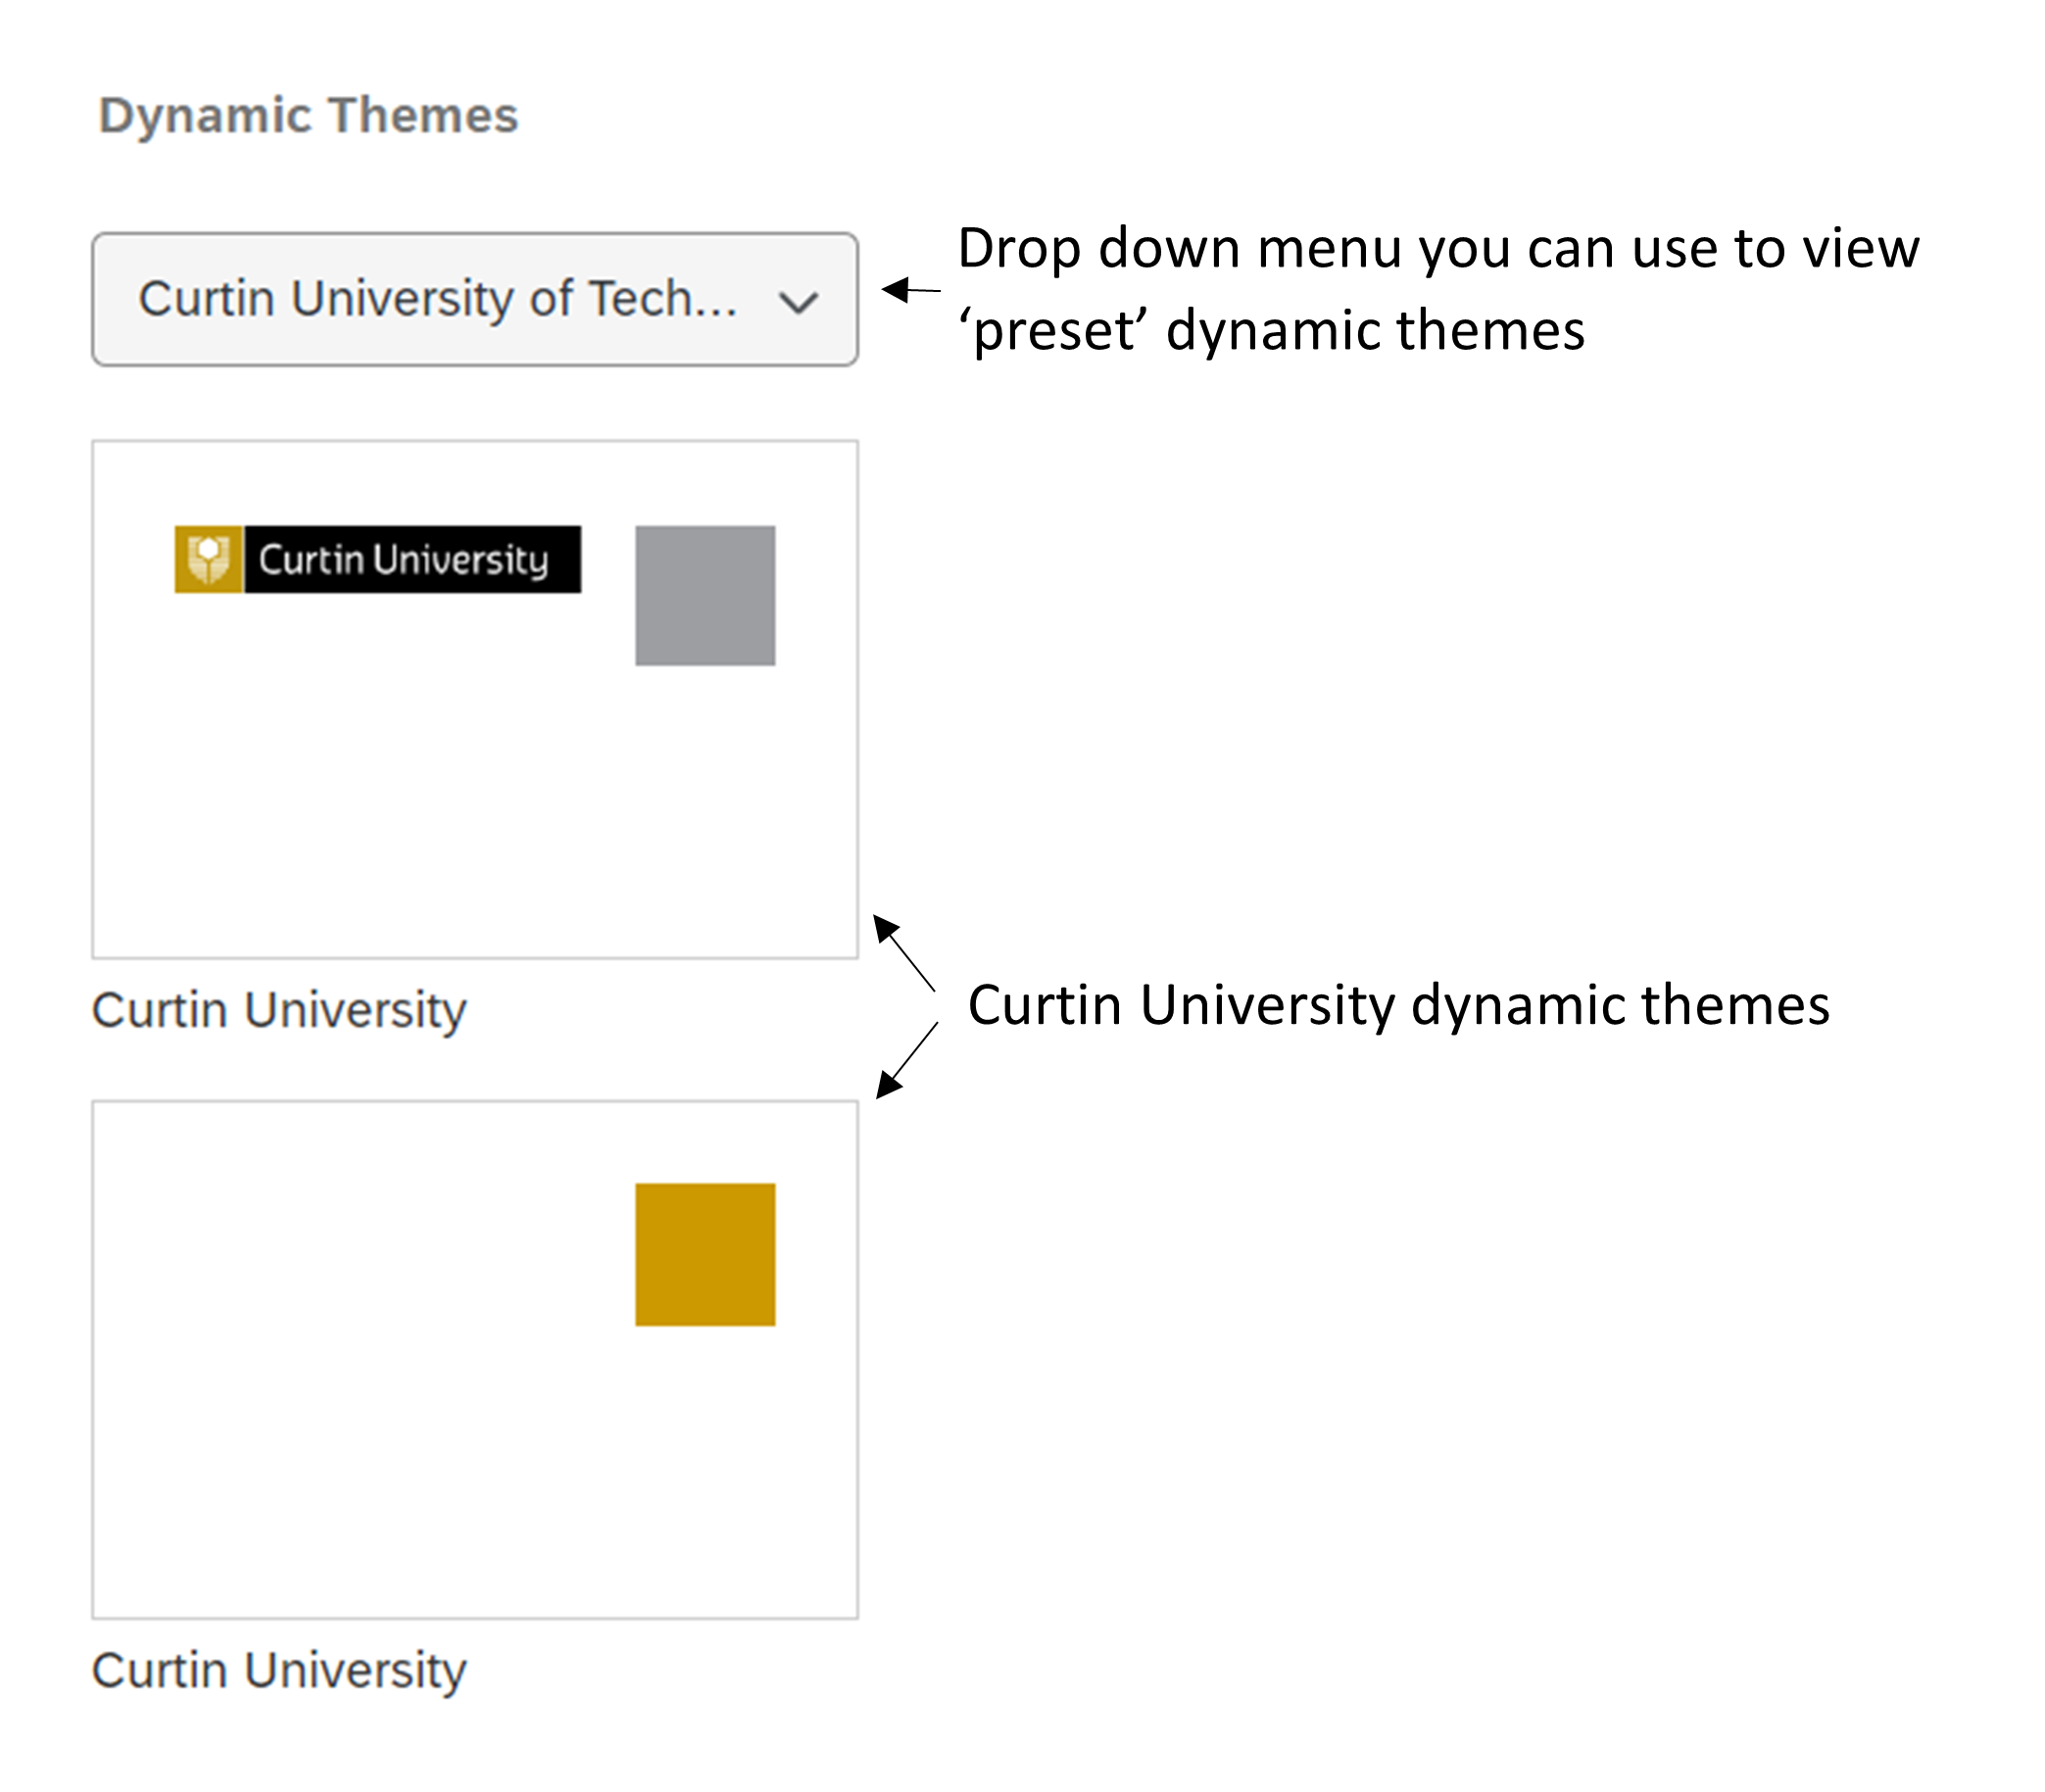 An image of the dynamic themes drop down menu and the two Curtin dynamic themes.